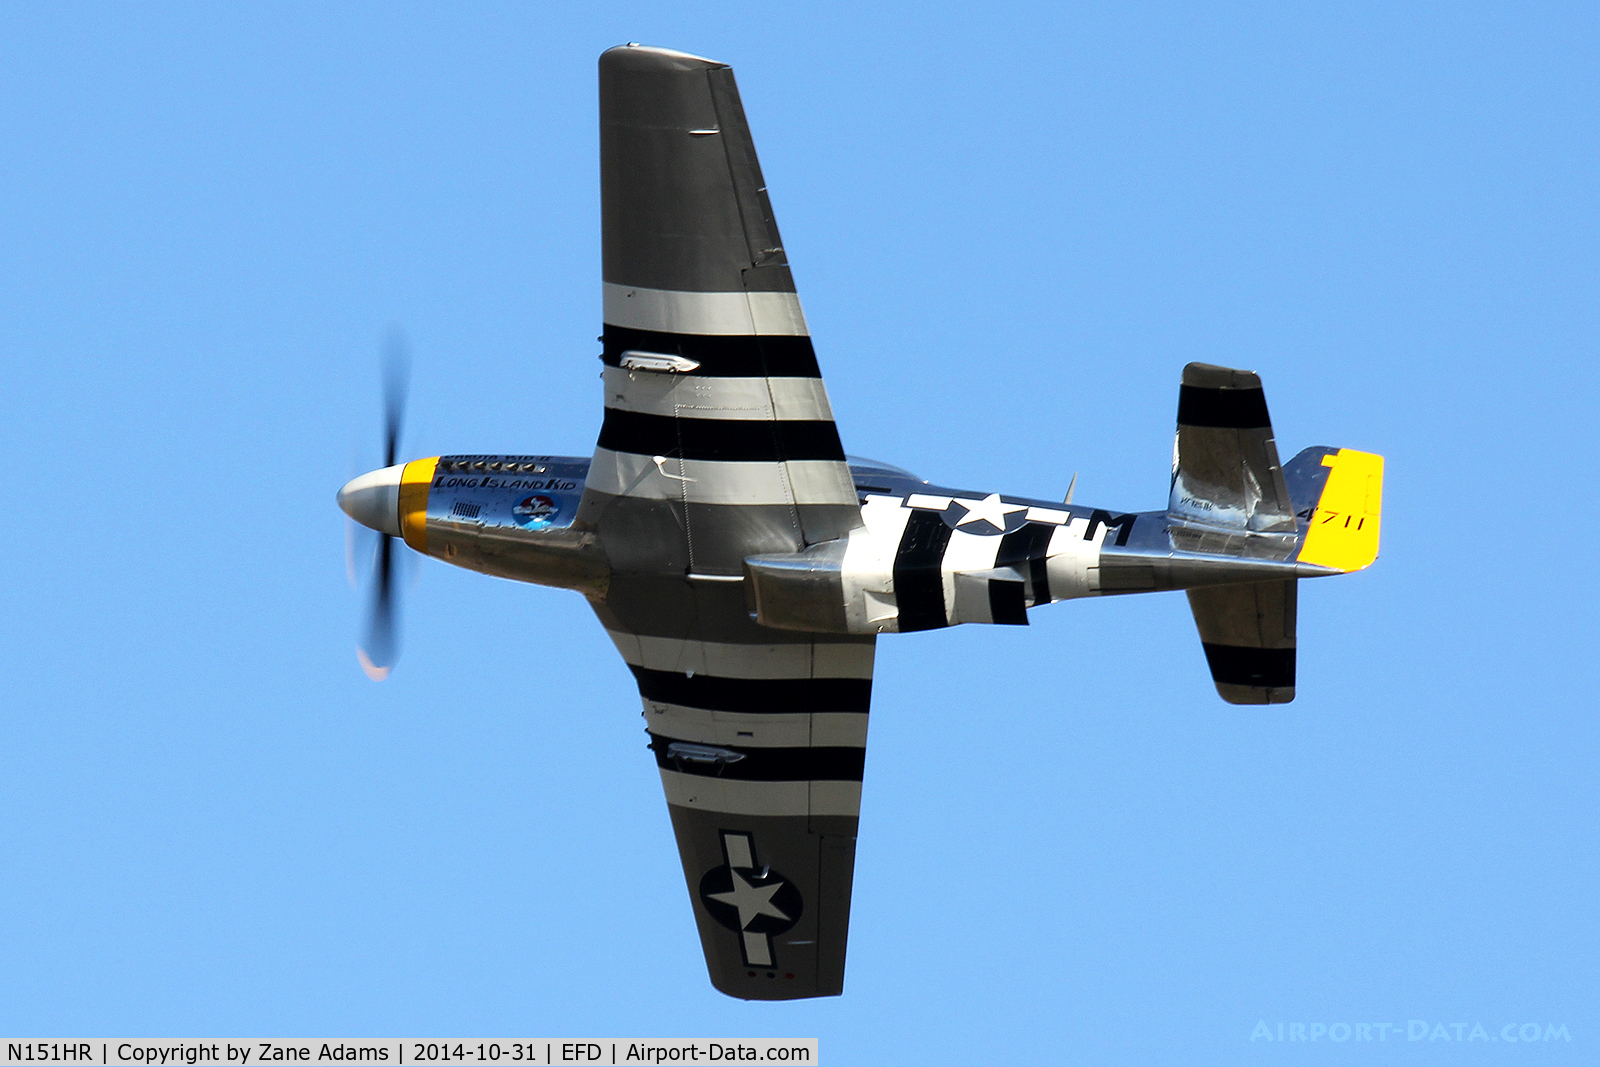 N151HR, 1945 North American P-51D Mustang C/N 12241064, At the 2014 Wings Over Houston Airshow